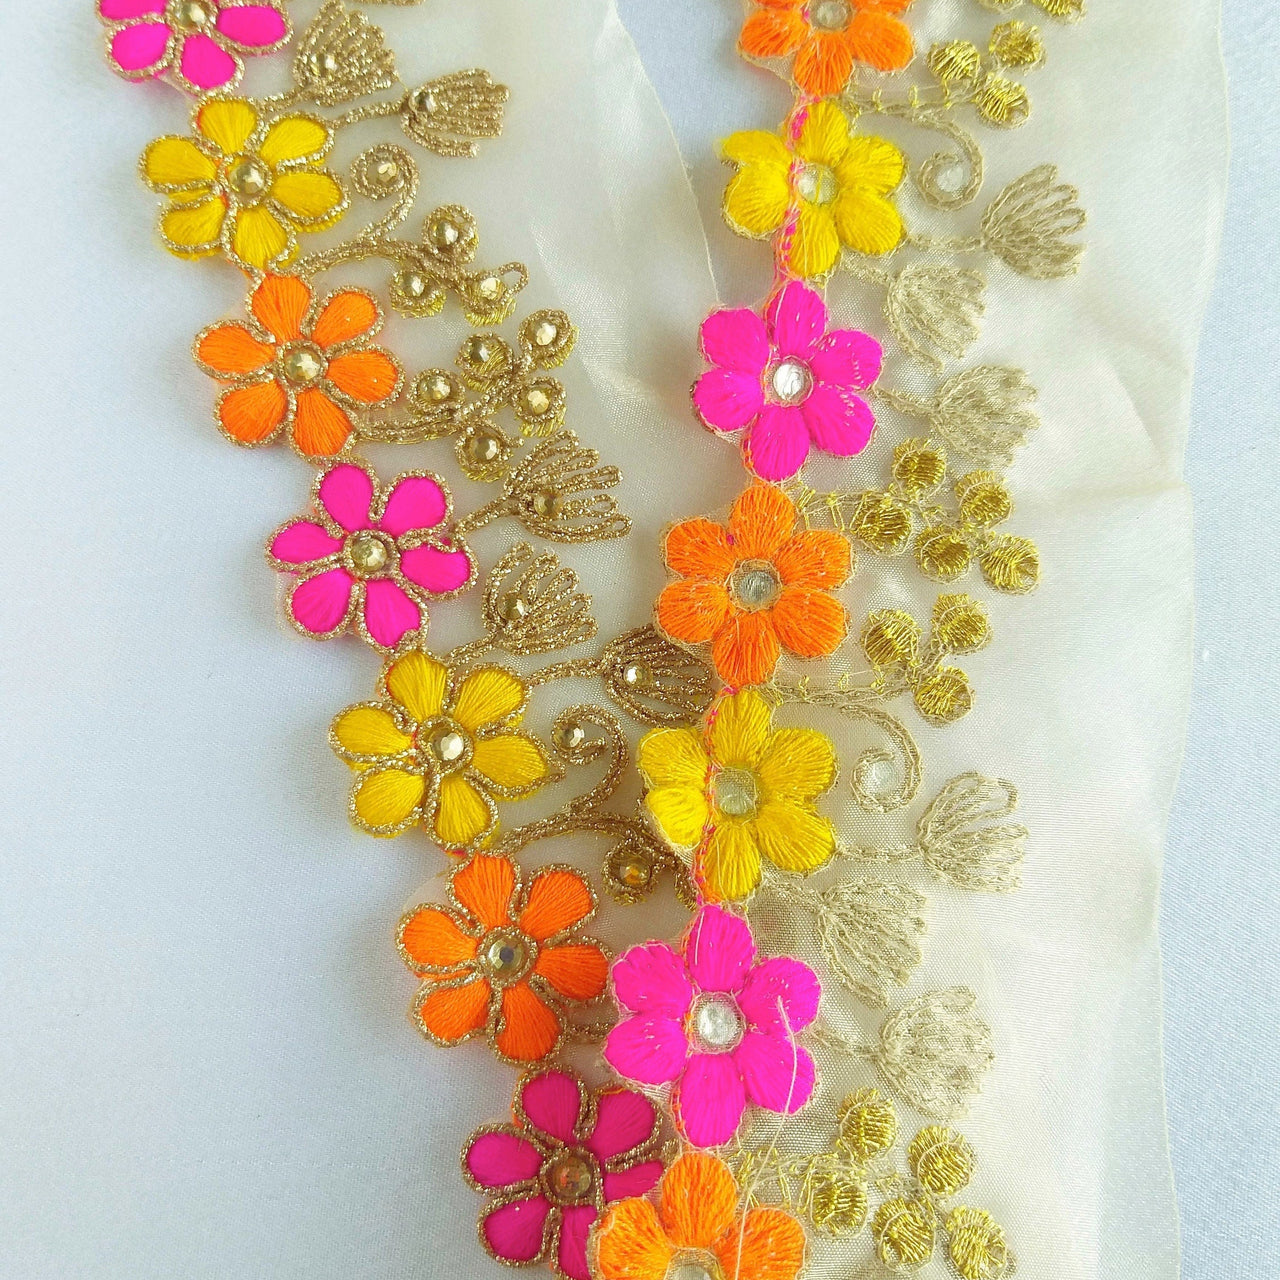 Gold Sheer Tissue Fabric Trim With Embroidered Pink, Yellow, Orange & Gold Flowers